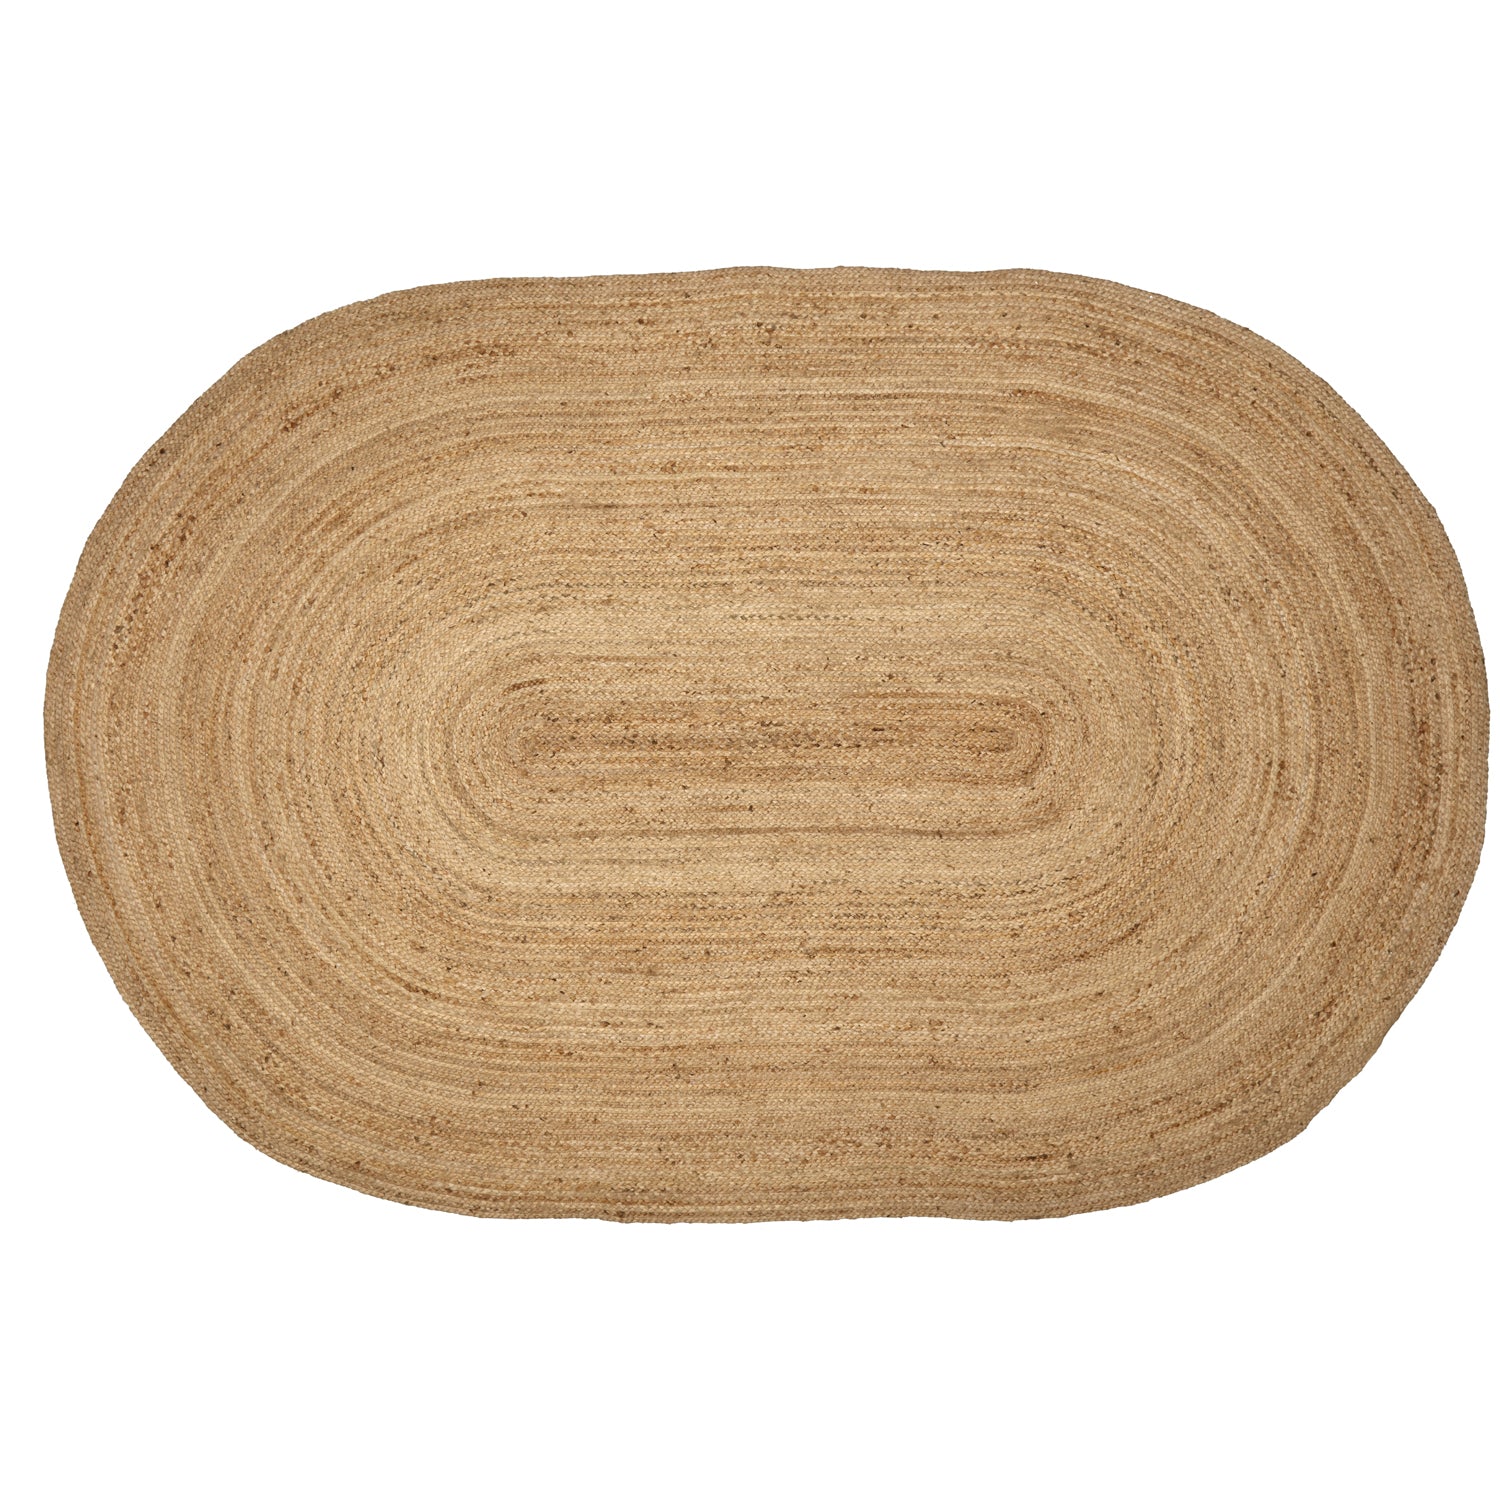 70702-Natural-Jute-Rug-Oval-w-Pad-60x96-image-11